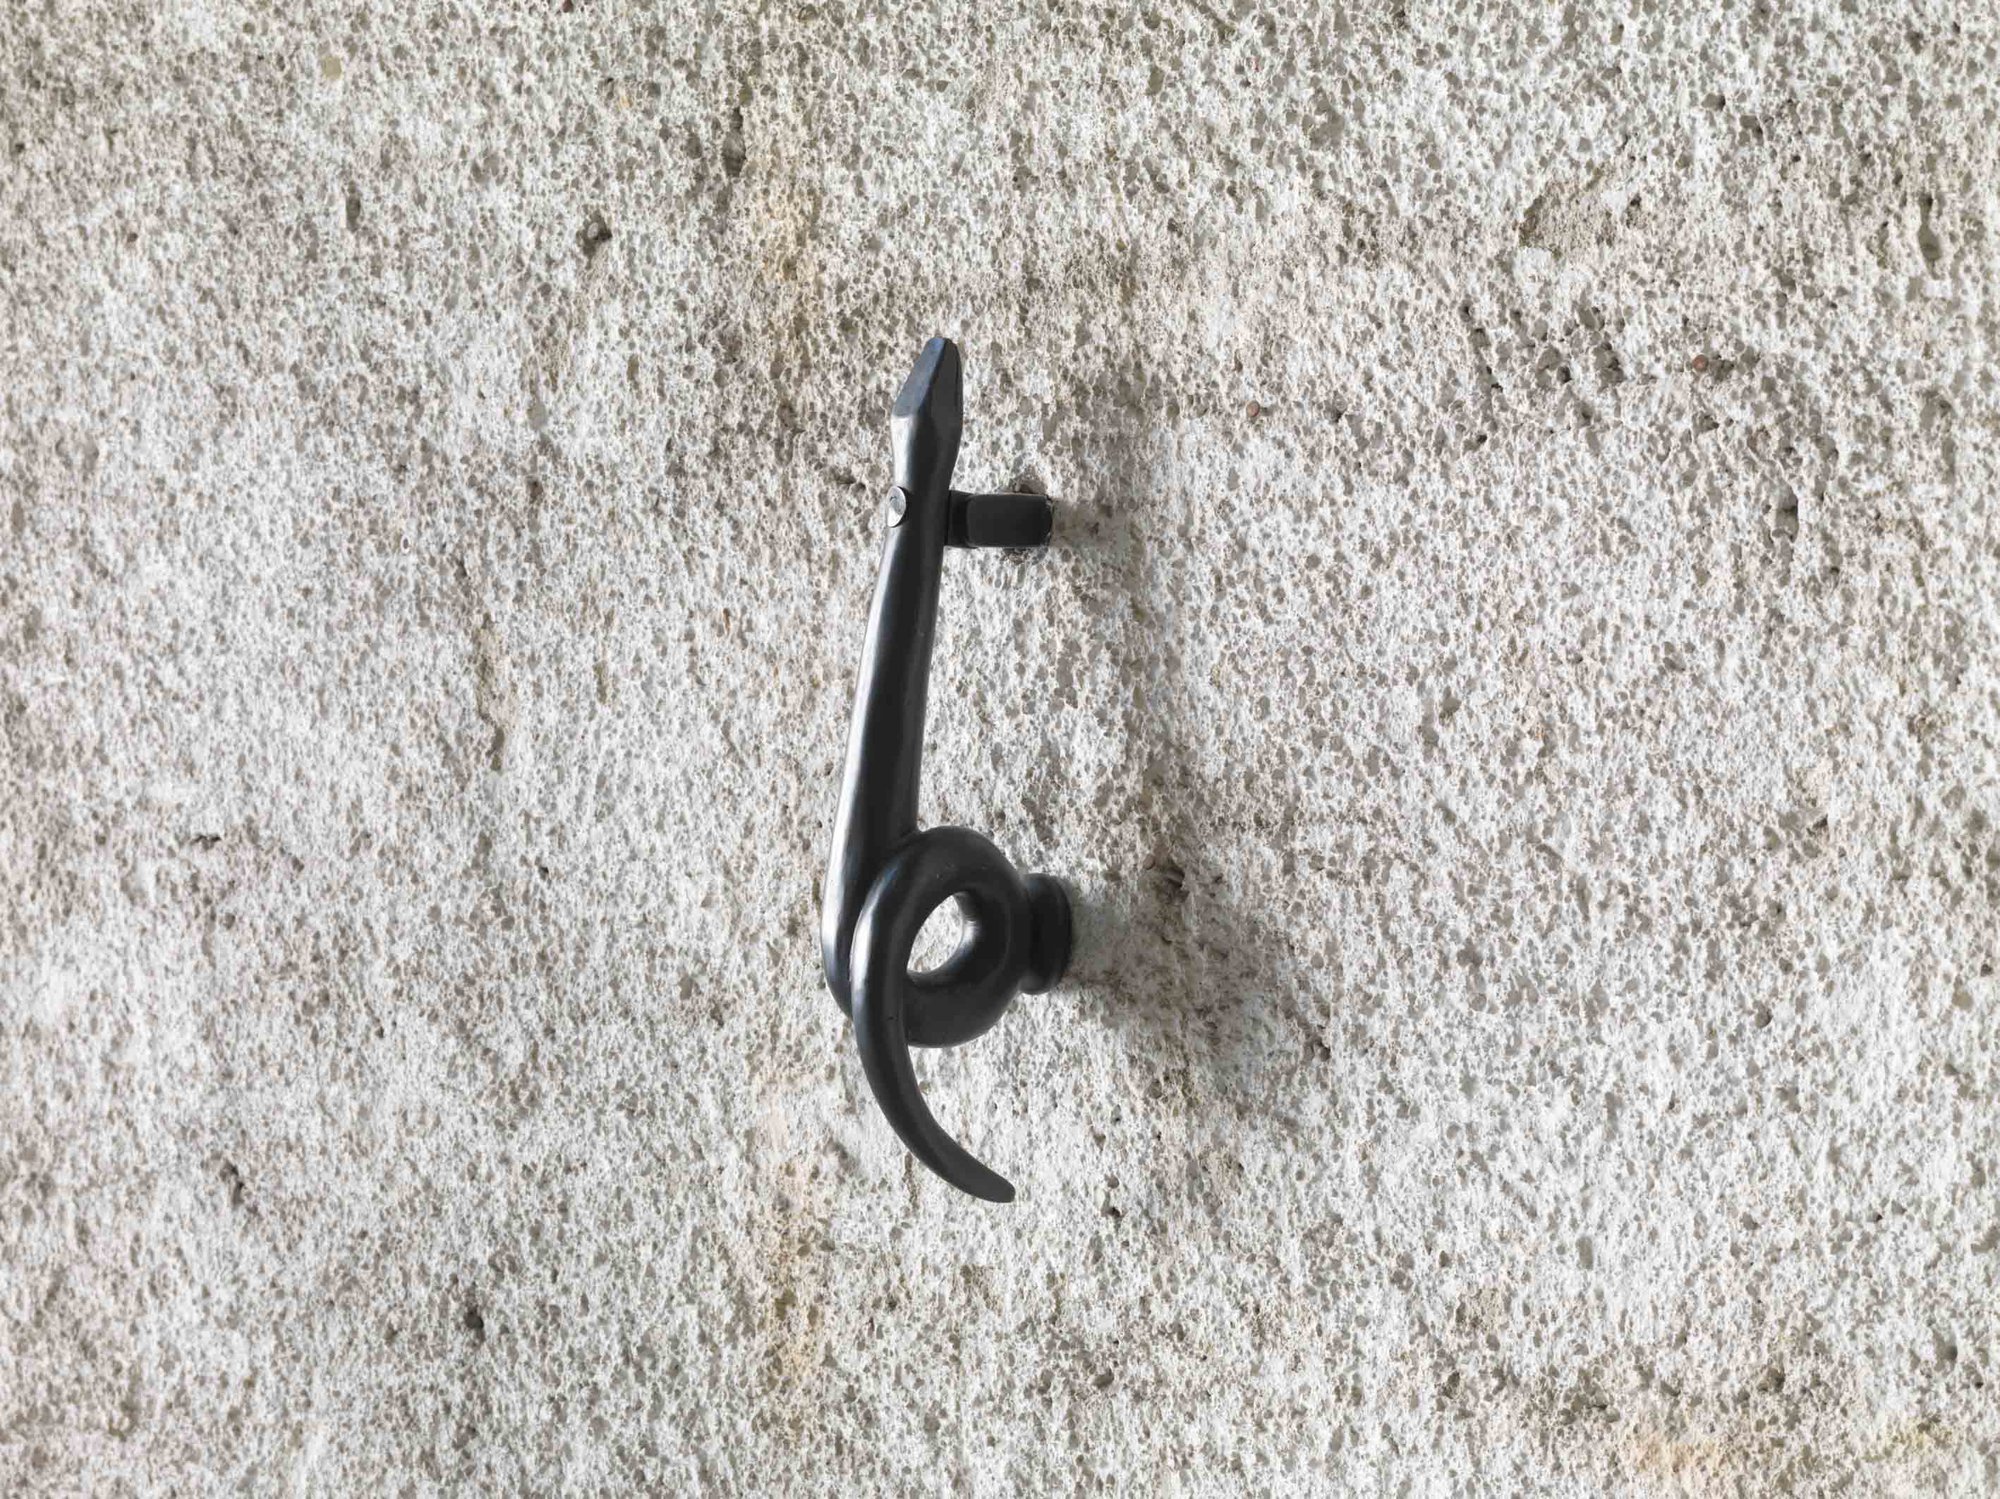 Christodoulos Panayiotou, Untitled, bronze door handle, 36 x 14 x 6 cm (14 1/8 x 5 1/2 x 2 3/8 in), 2013